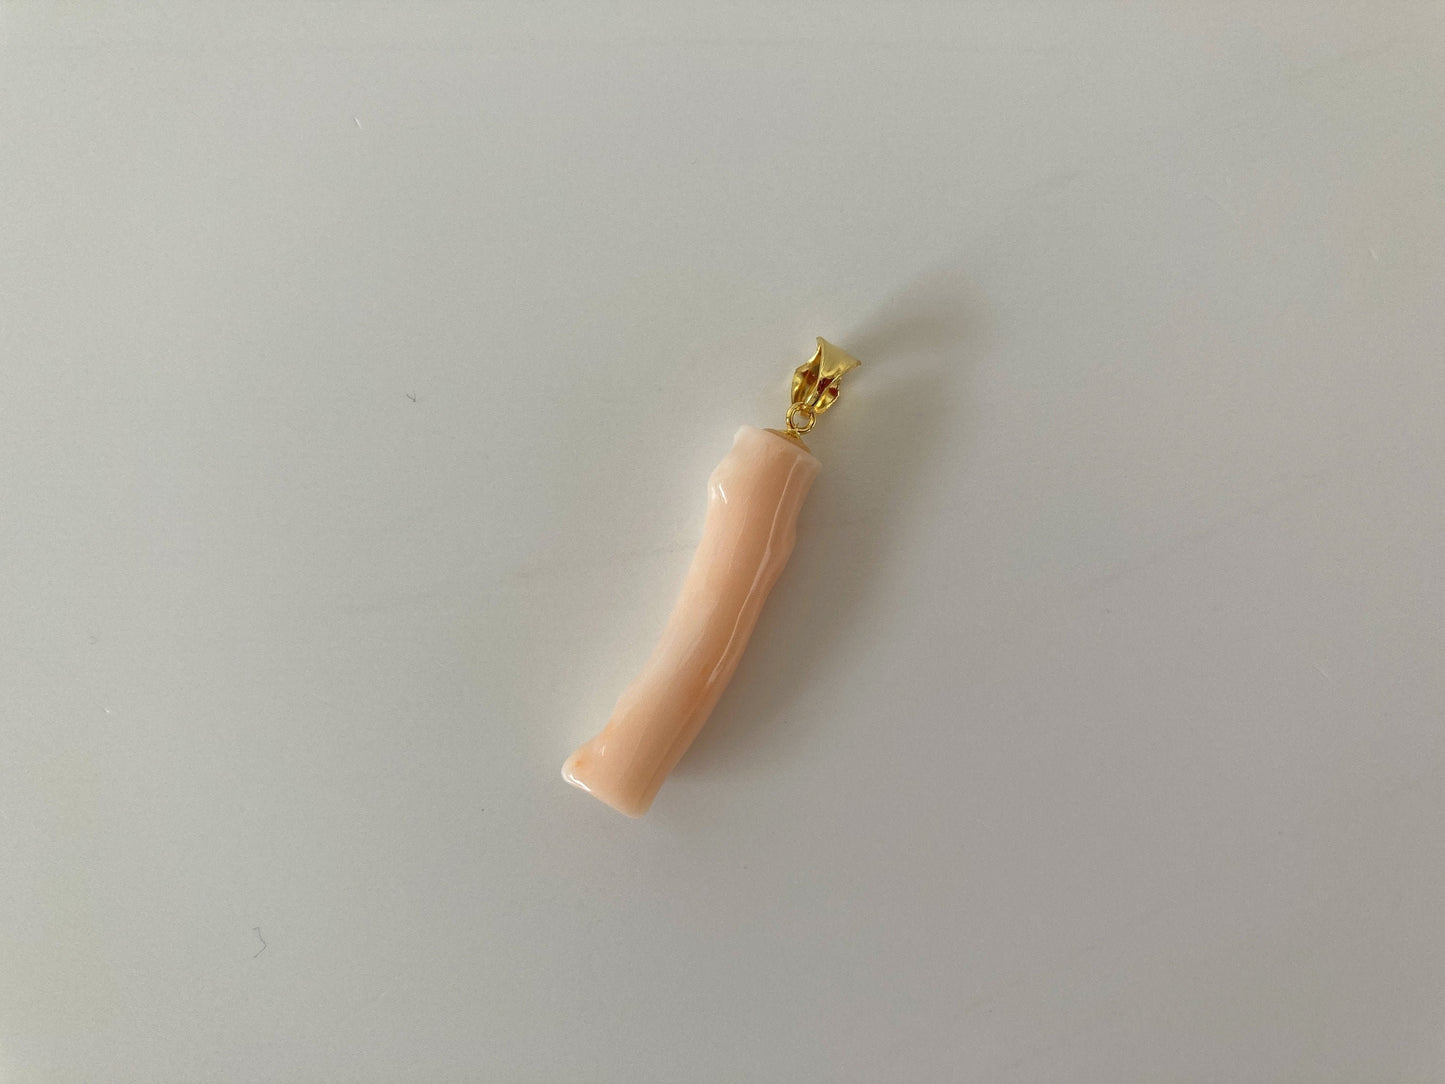 Natural pink color coral branch pendant, Natural Deep Sea Coral Branch Pendant, Genuine Undyed coral, Silver bail (gold plated)